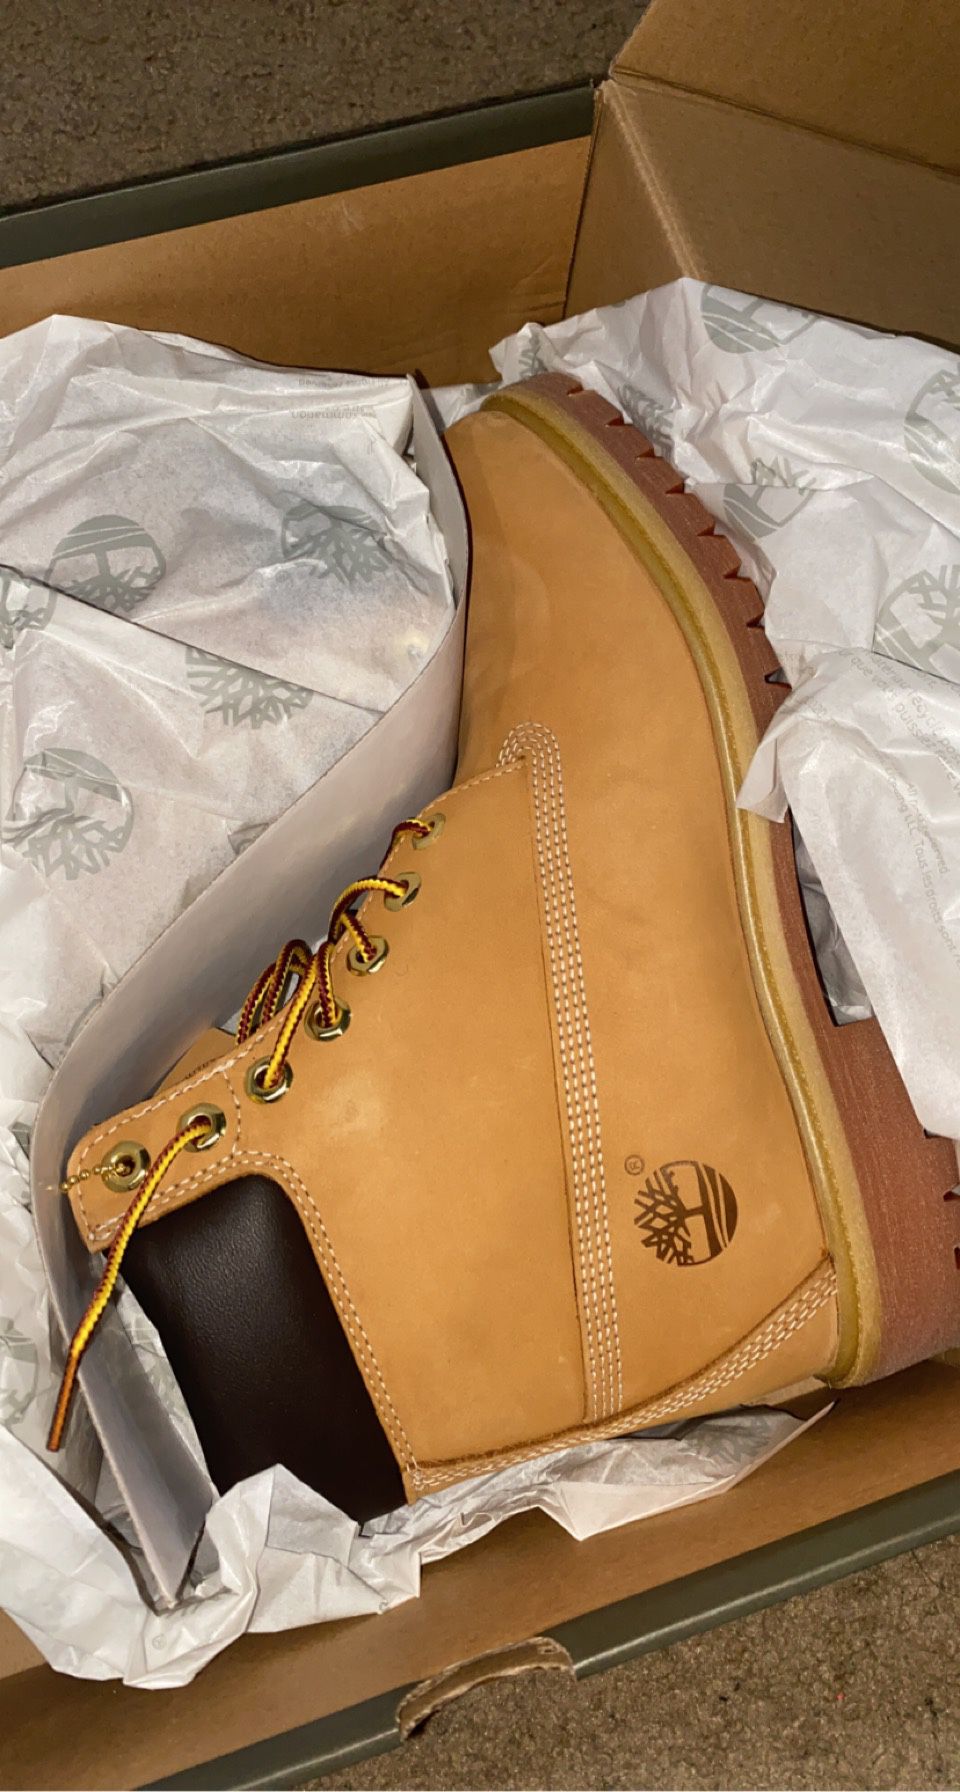 Timberland Wheat 6 Inch Boots